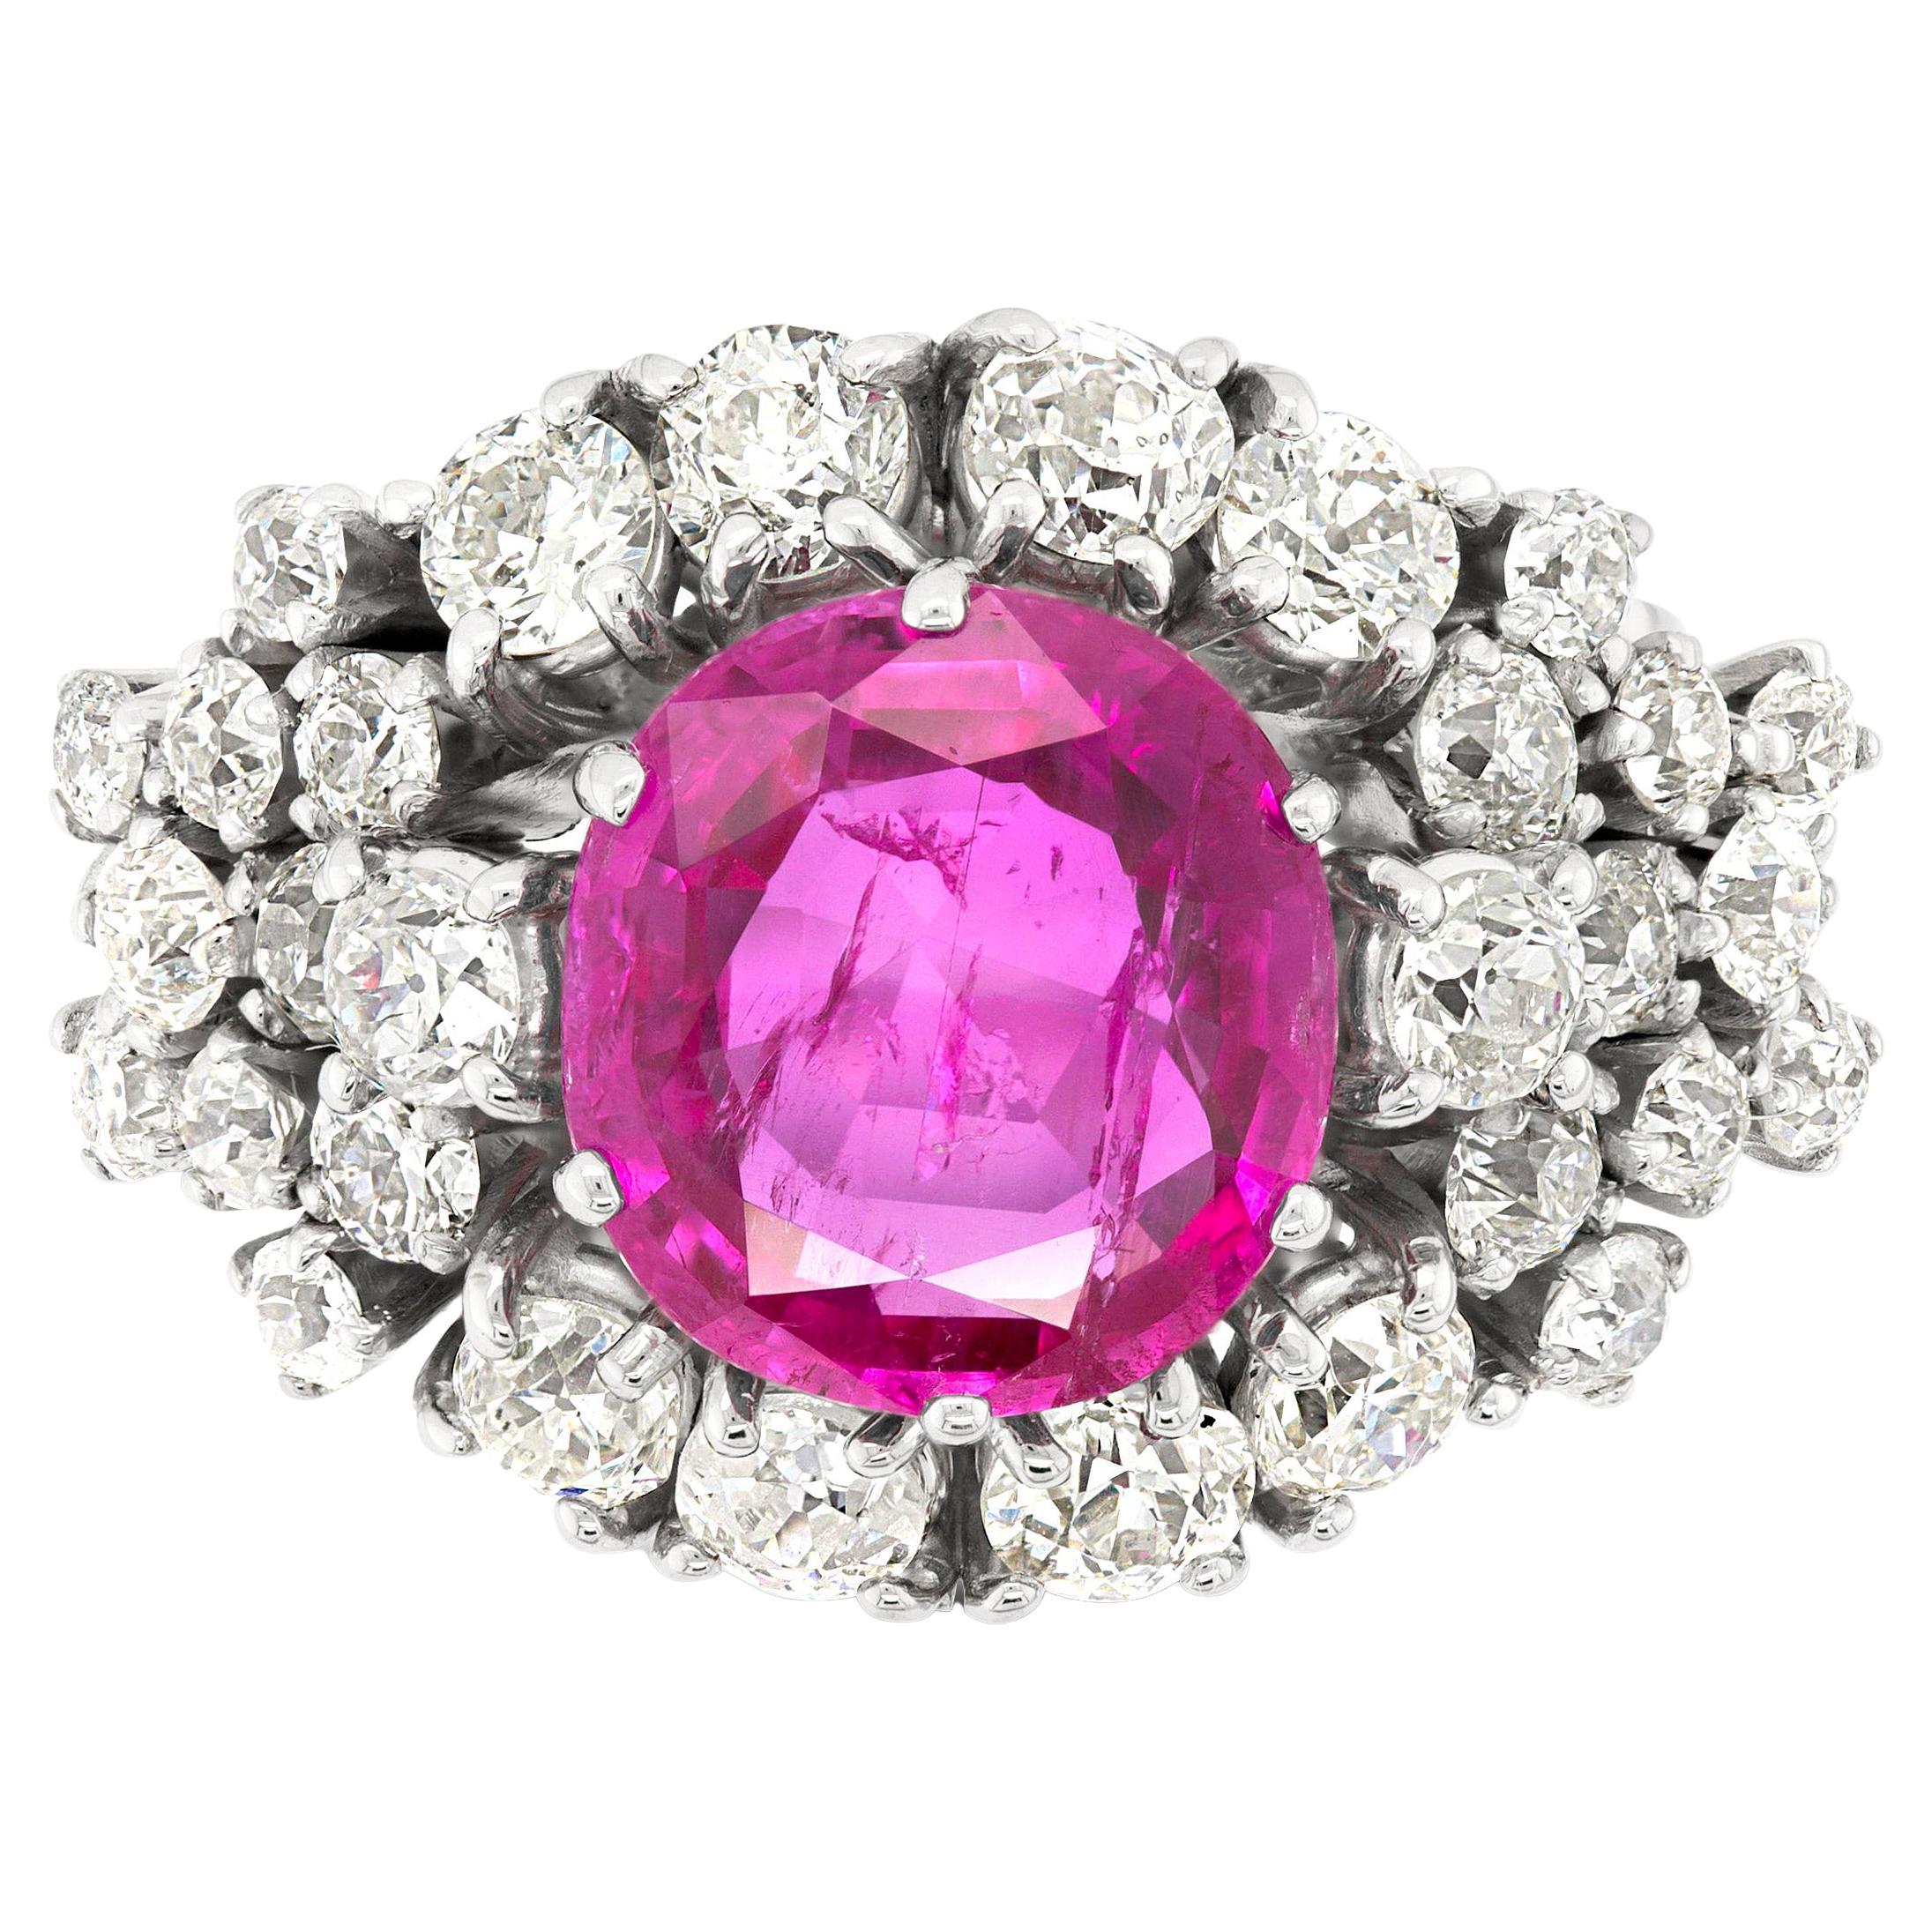 AGL Certified Vintage 4.73 ct. Burma Ruby Cluster Ring